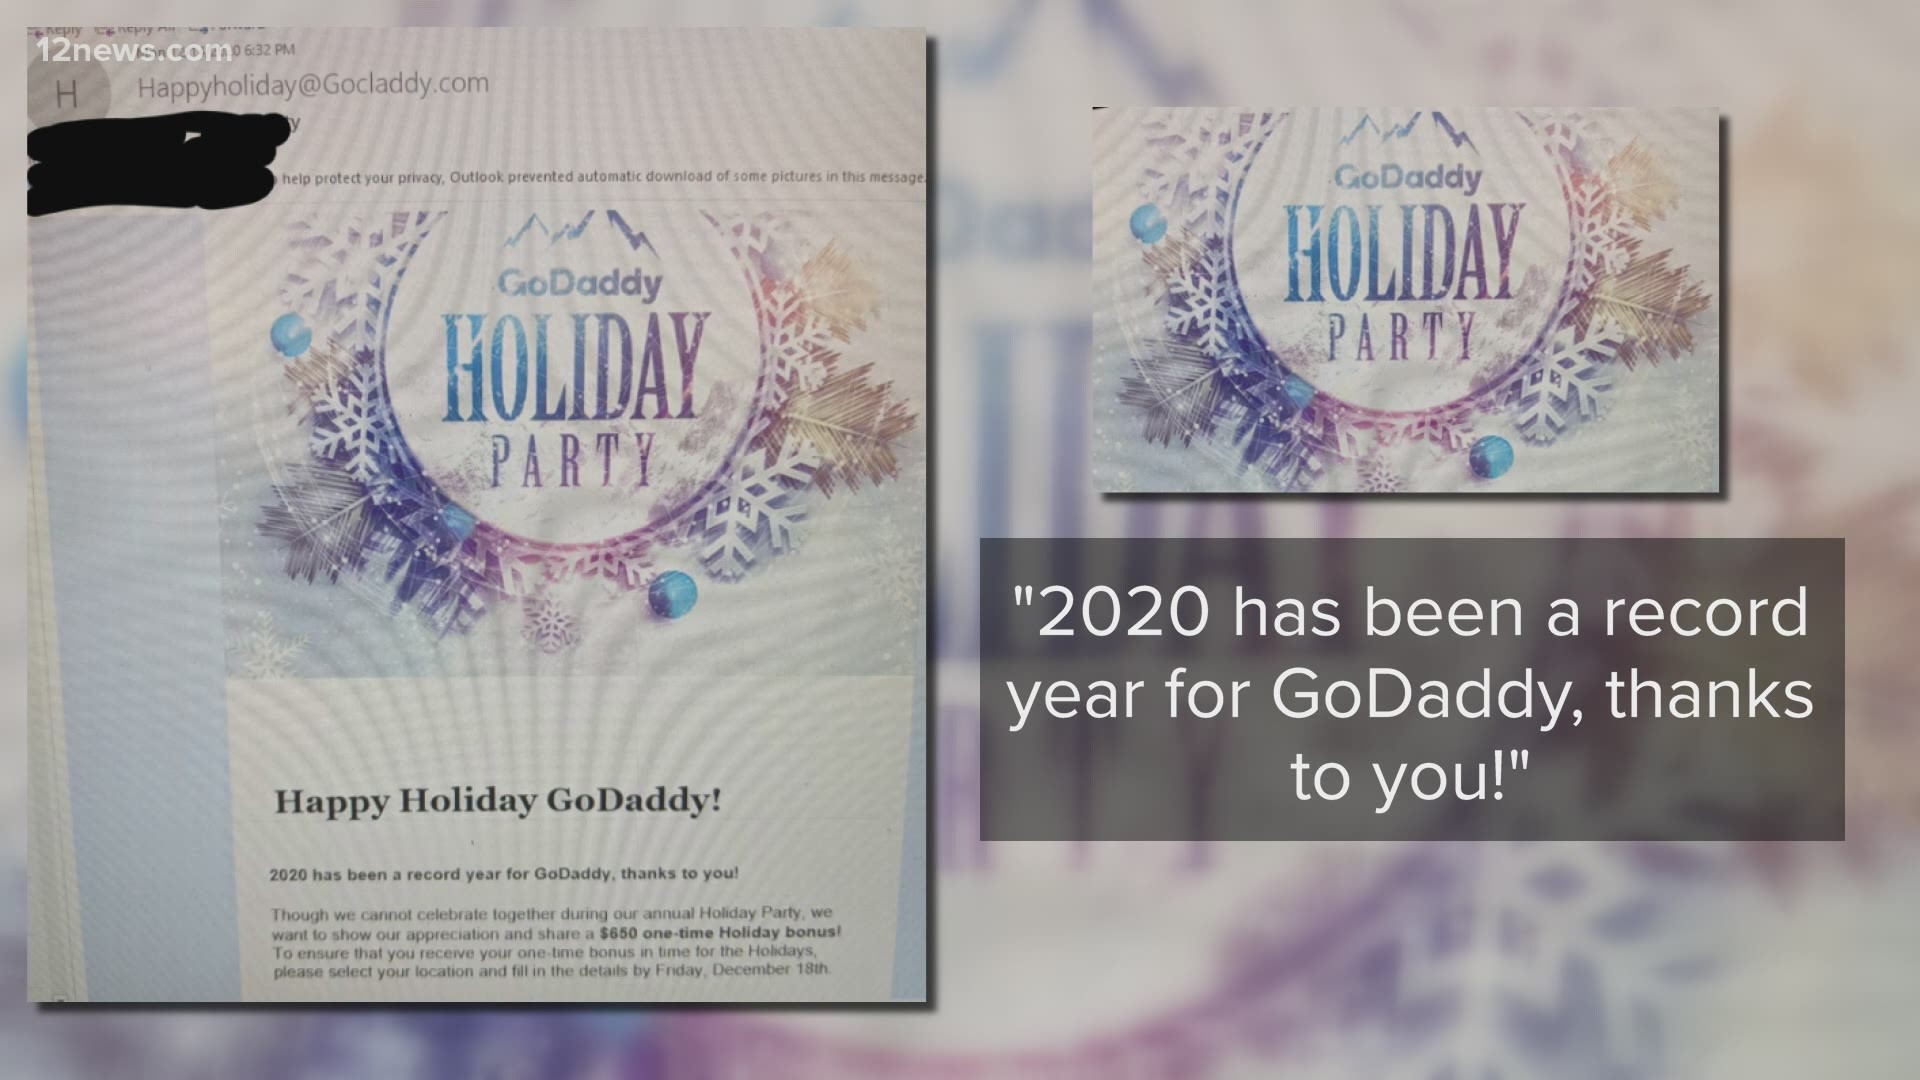 The Scottsdale-based company told employees they were getting a holiday bonus, but it turns out it was all a hoax meant to test employees.